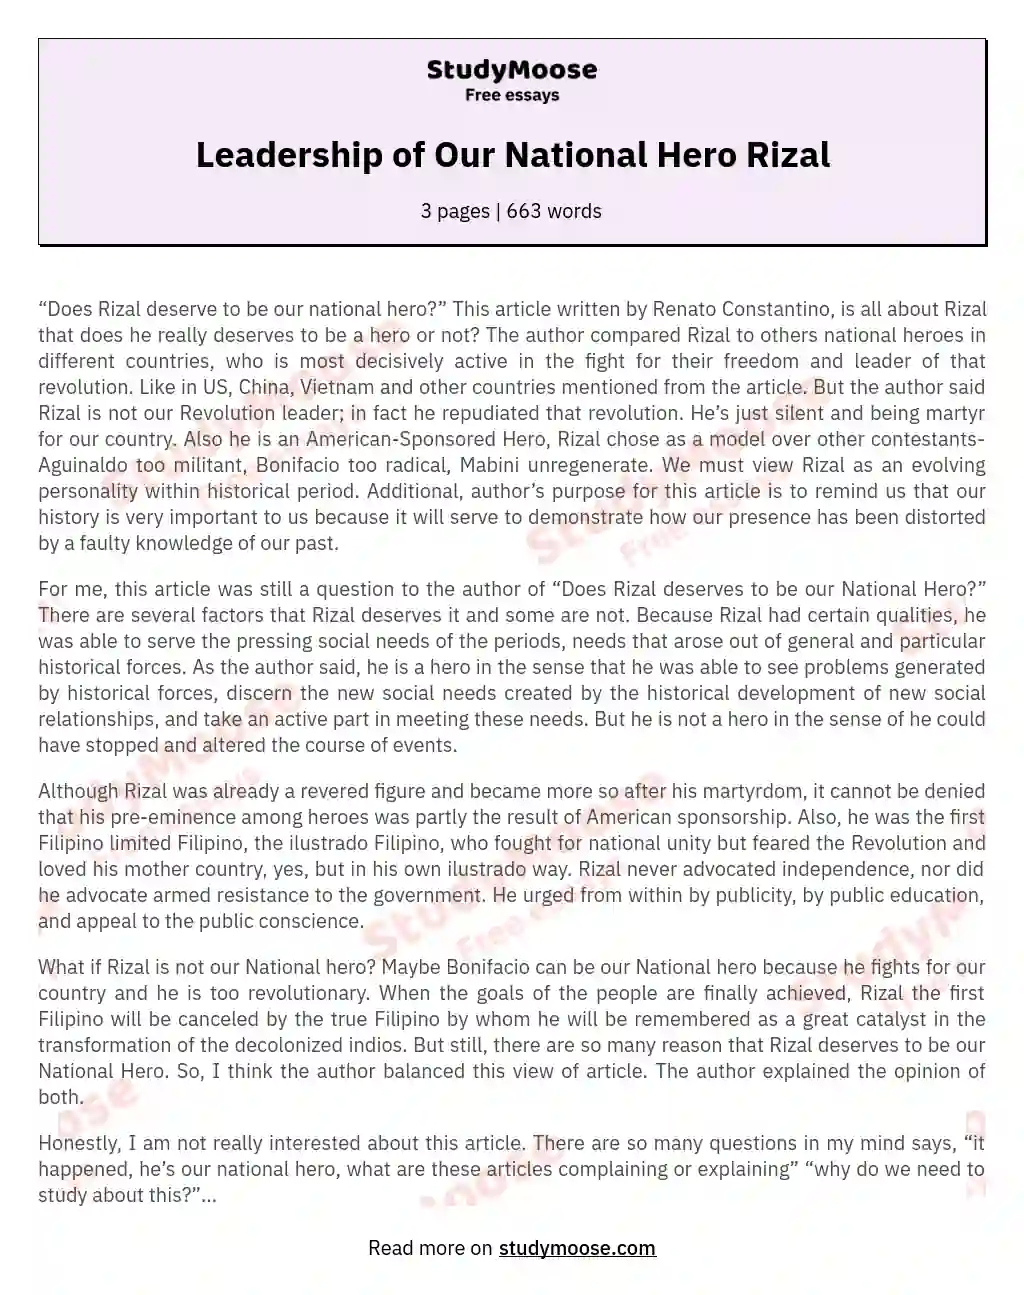 Leadership of Our National Hero Rizal